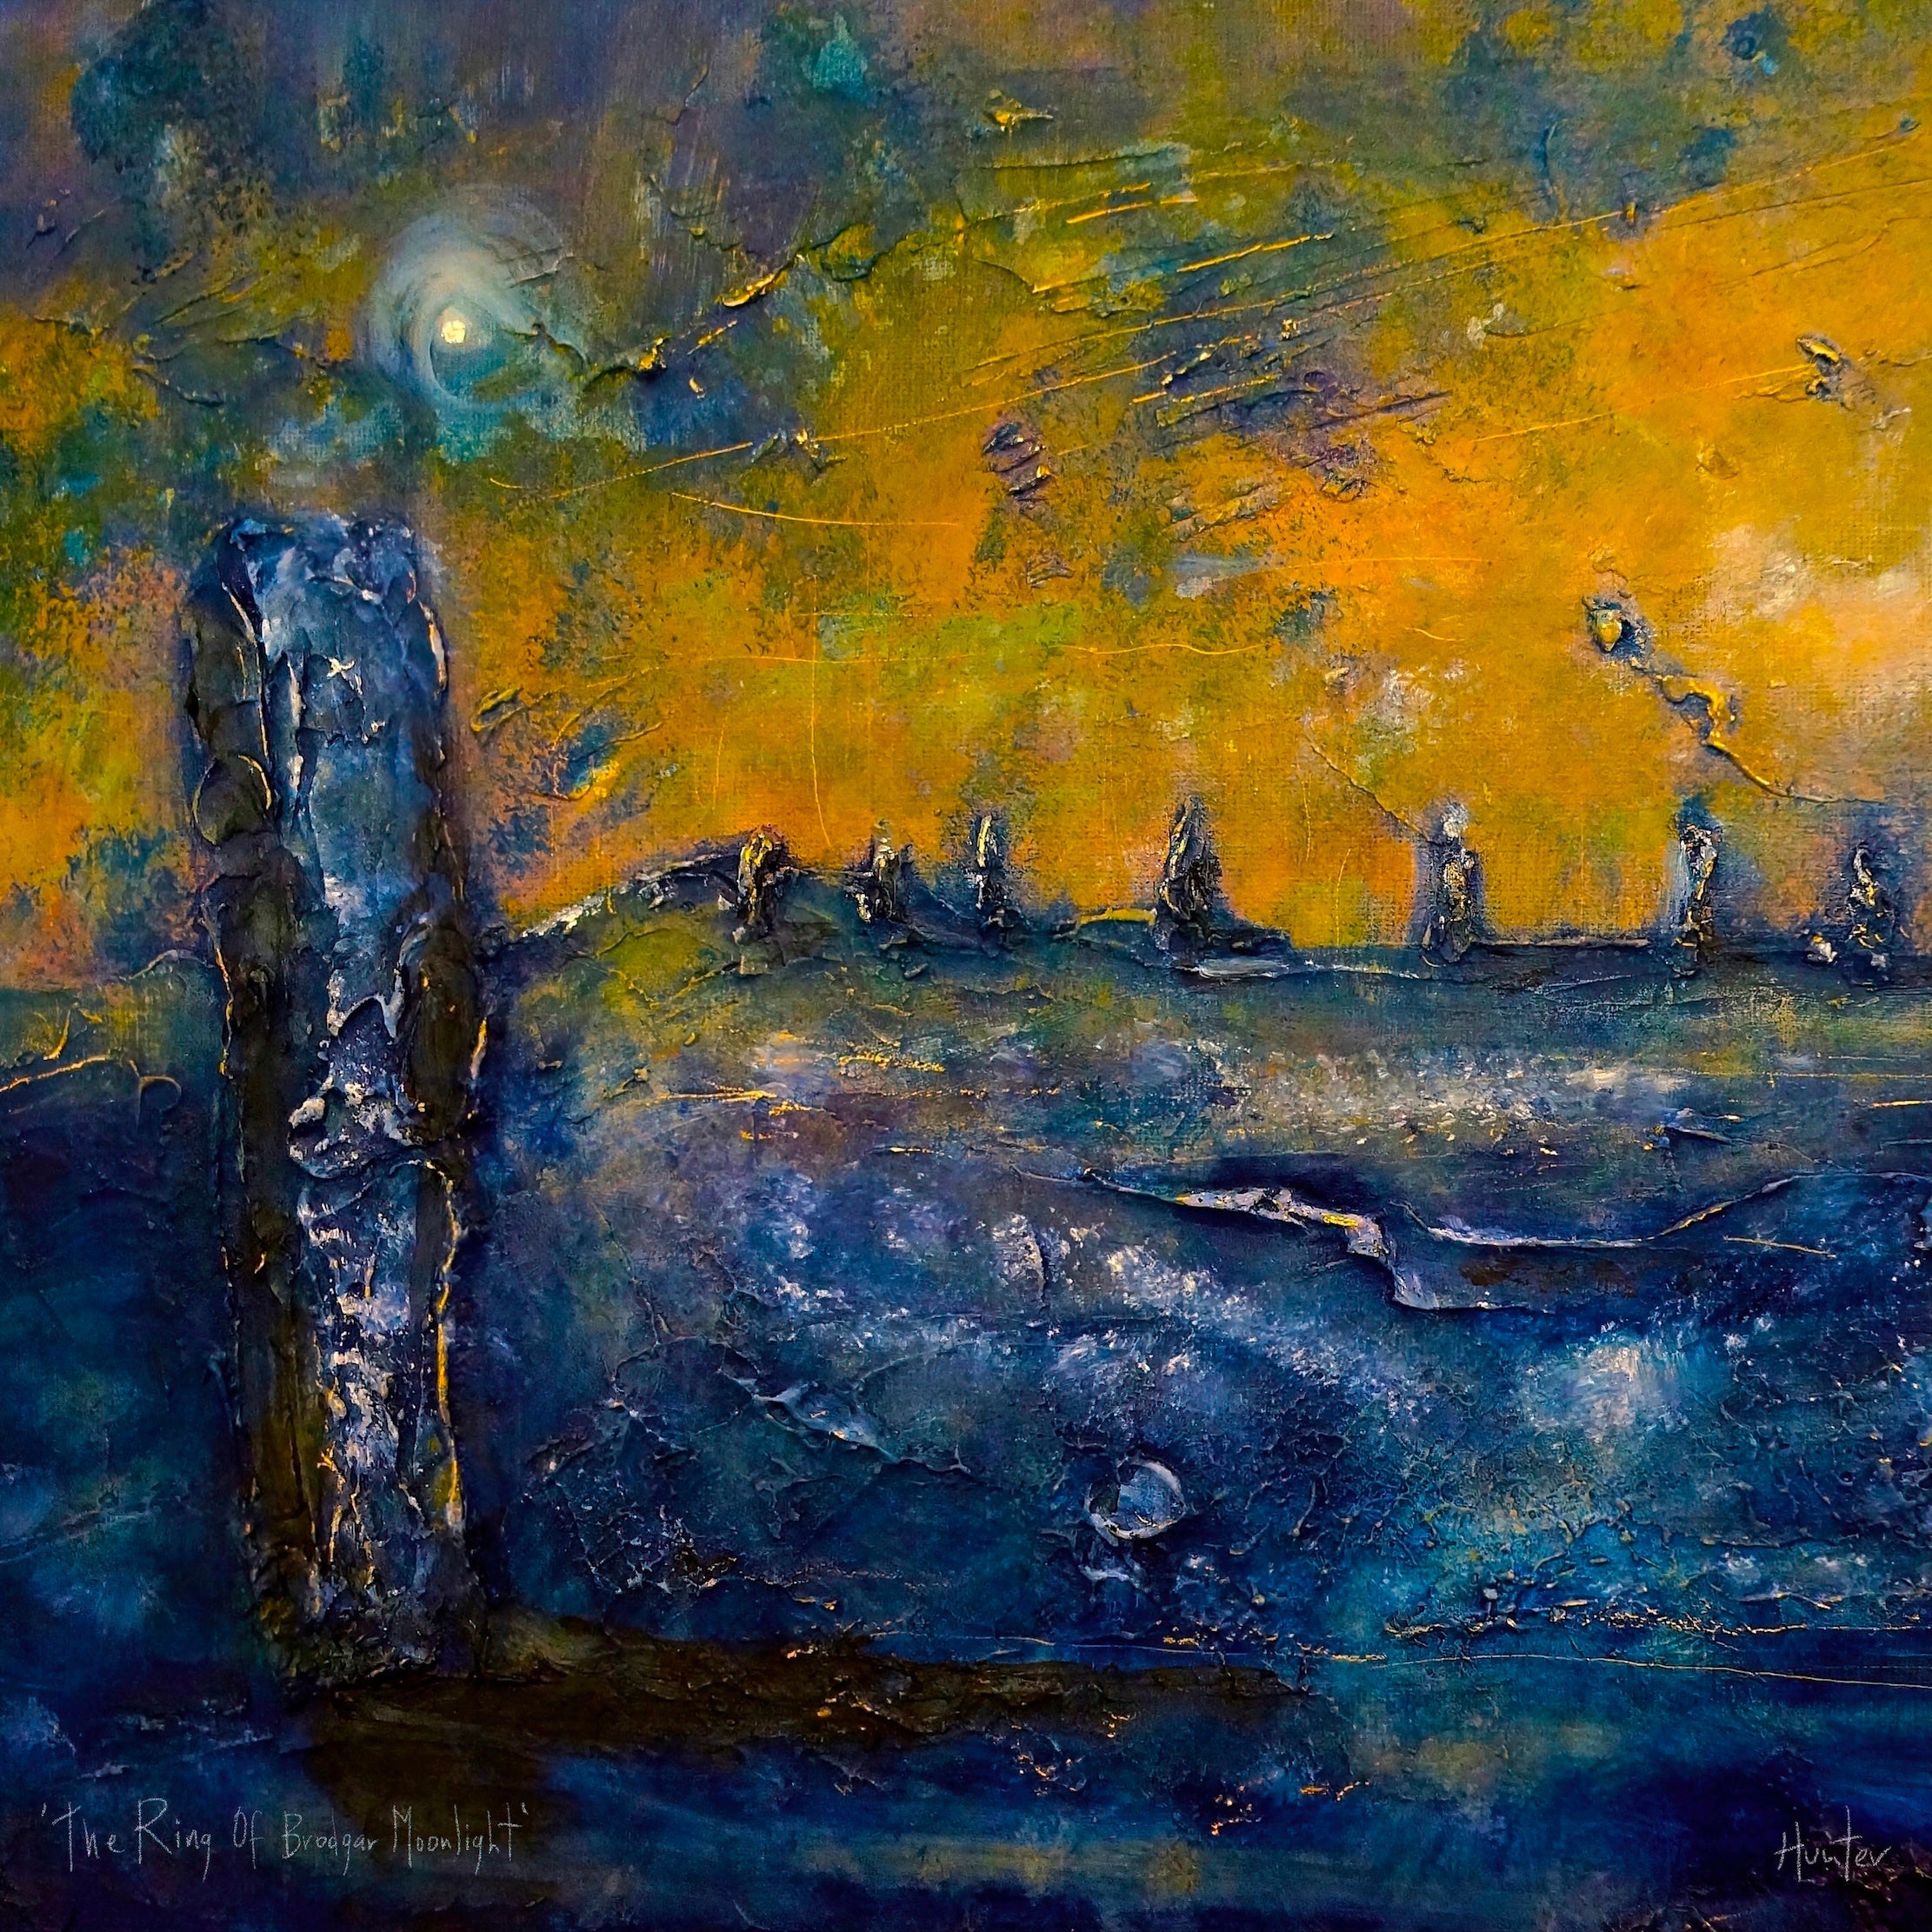 Brodgar Moonlight Orkney | Scotland In Your Pocket Art Print-Scotland In Your Pocket Framed Prints-Orkney Art Gallery-Paintings, Prints, Homeware, Art Gifts From Scotland By Scottish Artist Kevin Hunter